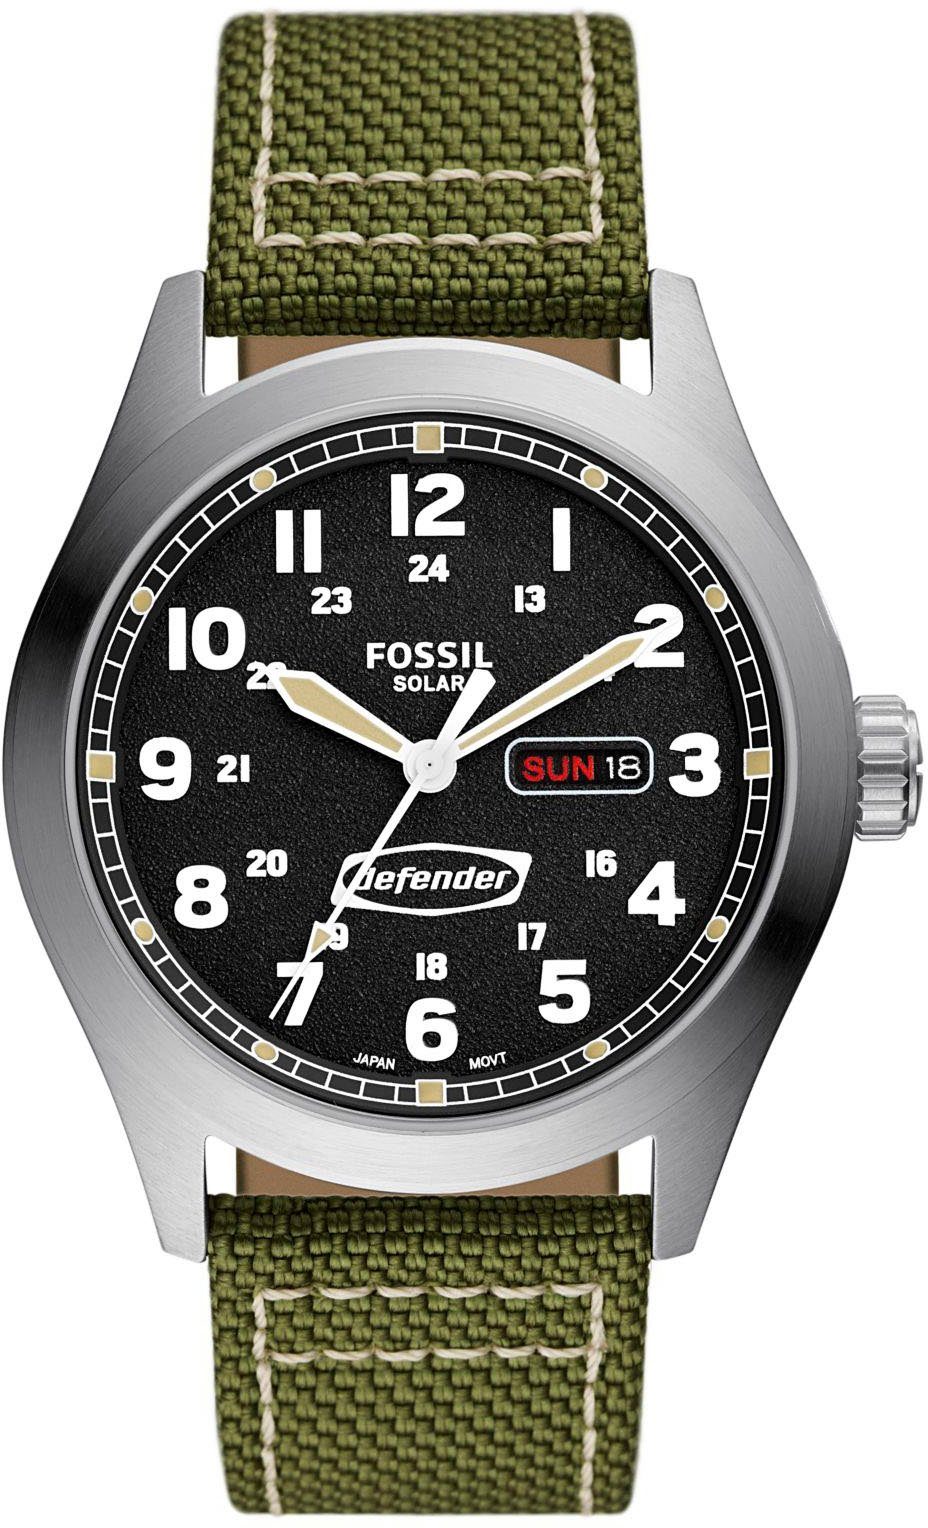 Solaruhr FS5977, DEFENDER, Fossil limited edition